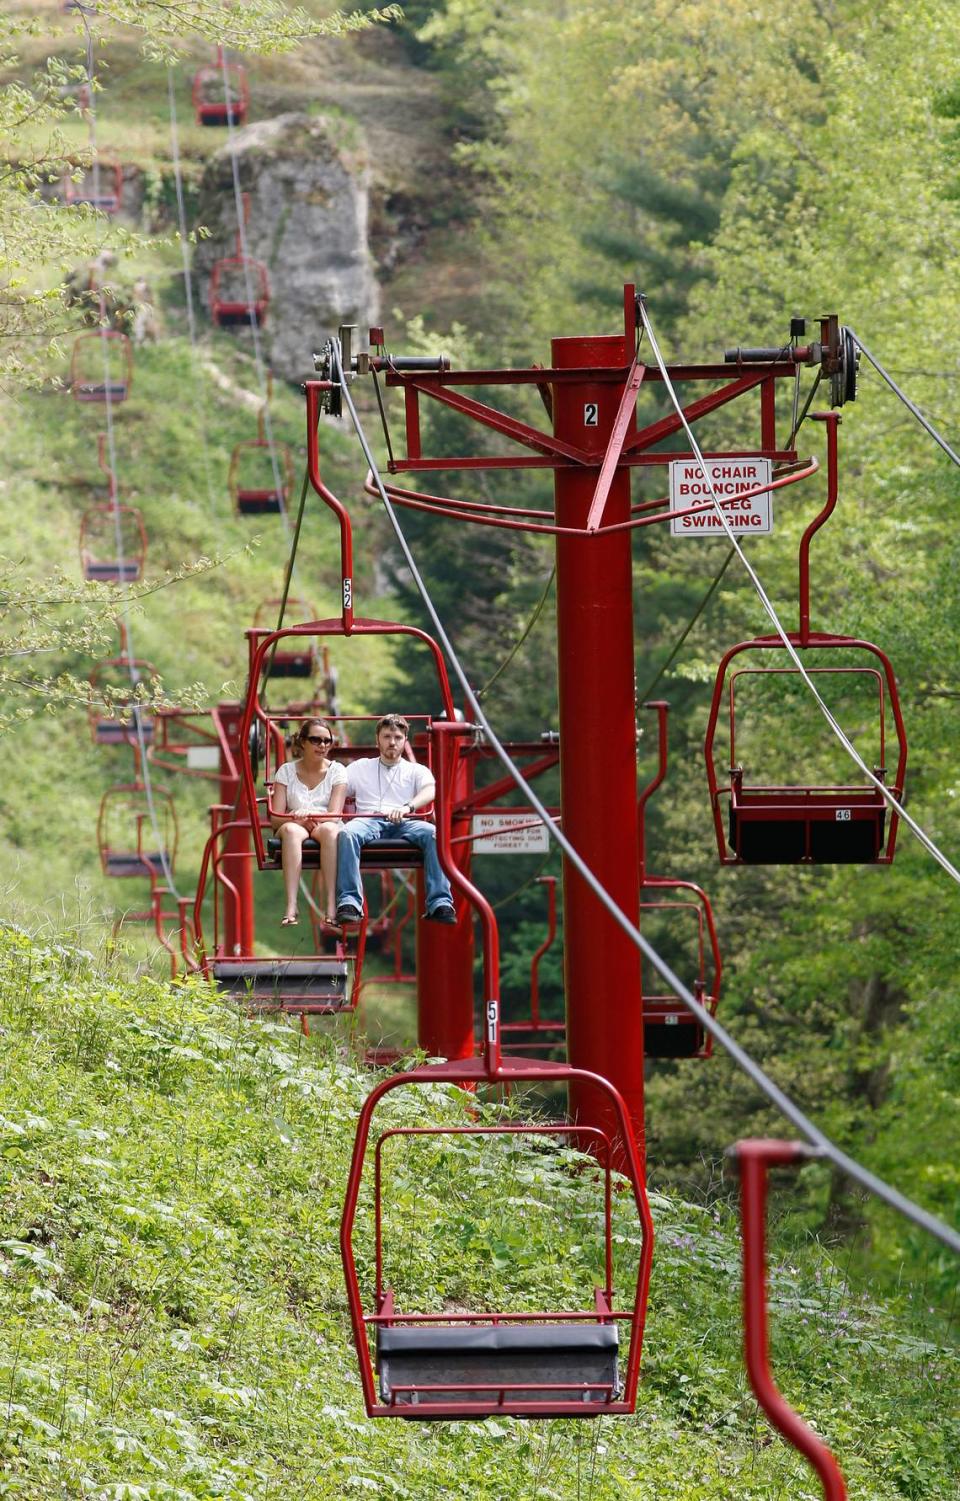 Sarah Evans, left, and Chad Cantrell, right, both from West Liberty, rode the skylift at Natural Bridge State Park in Slade, Ky. in 2008.